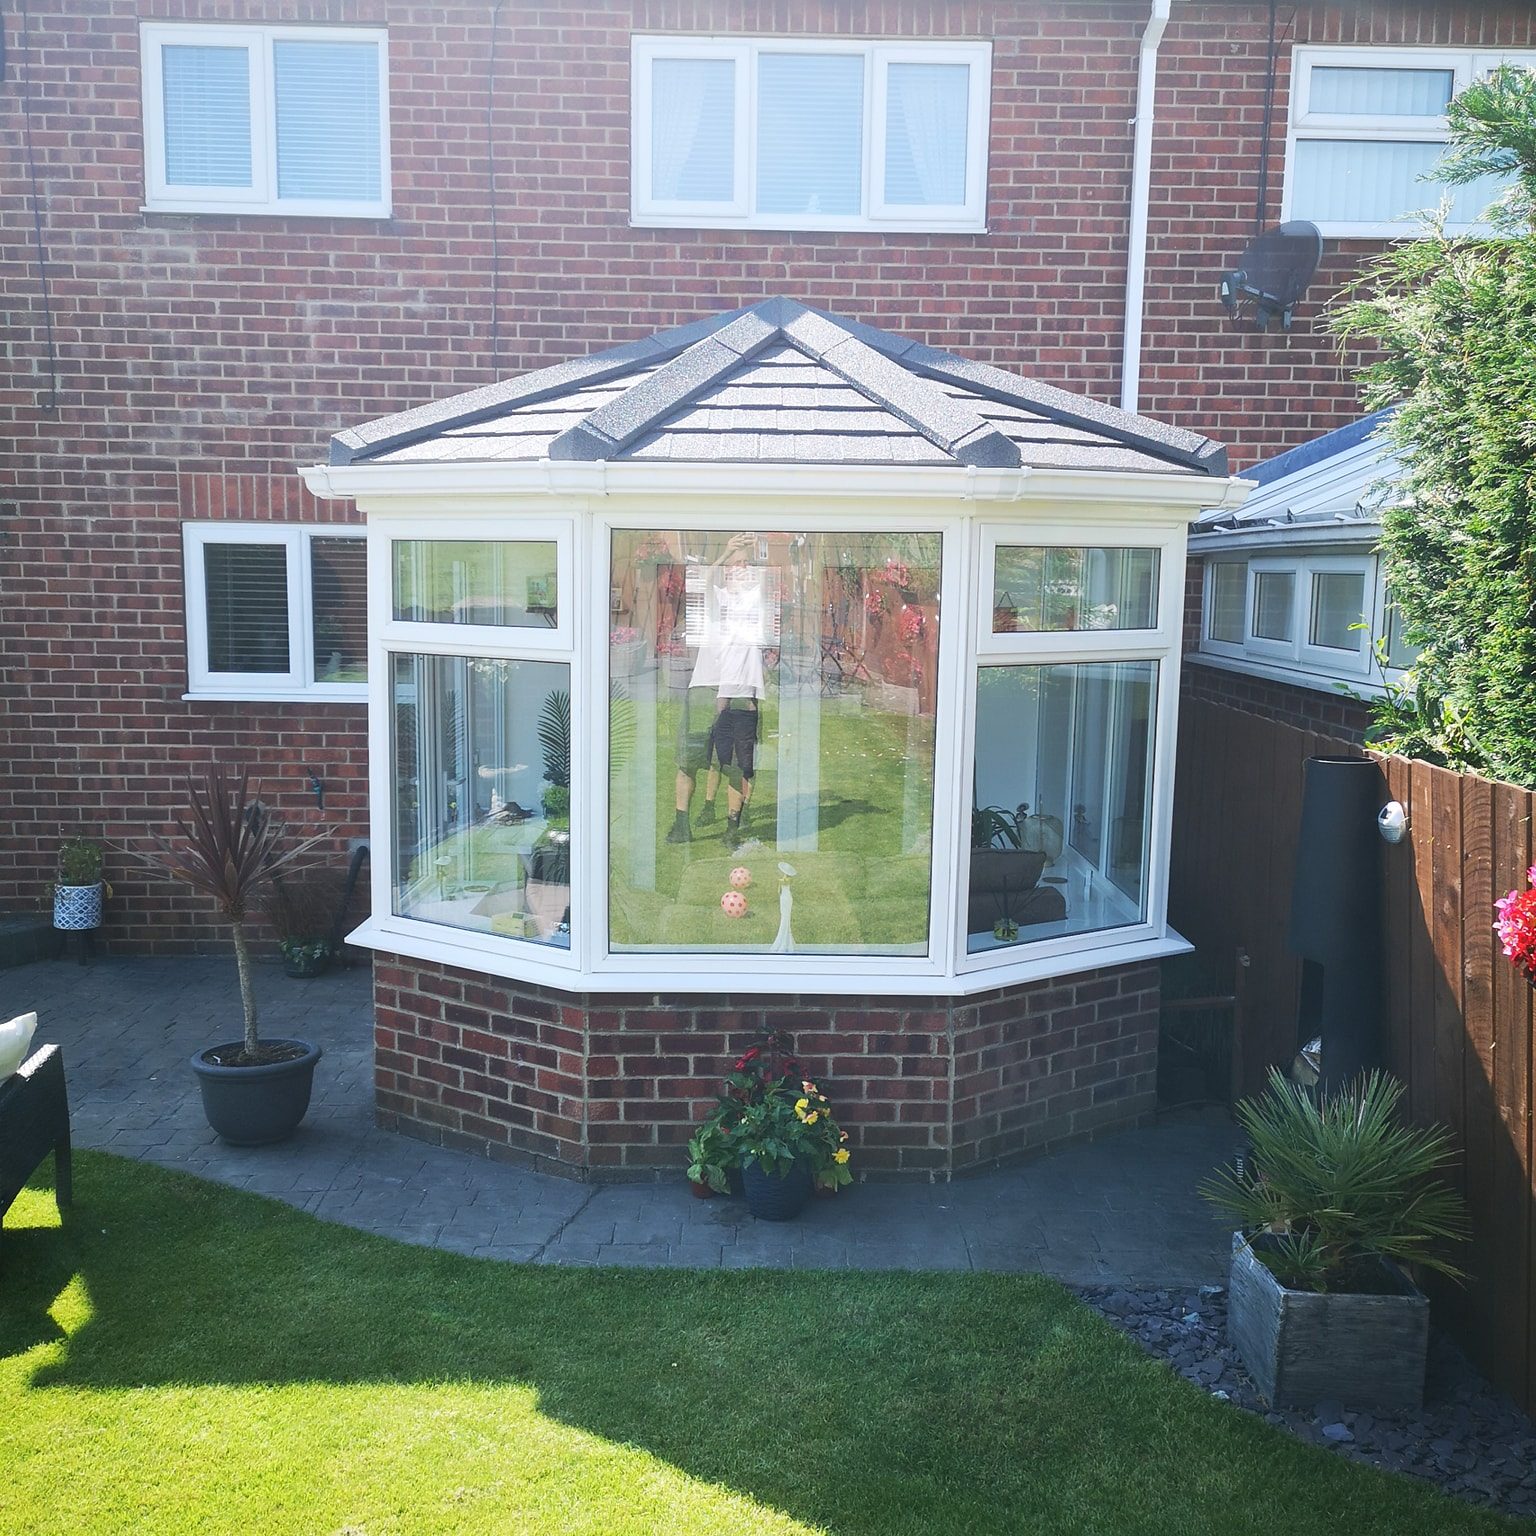 Conservatory Conversion on a warm sunny day